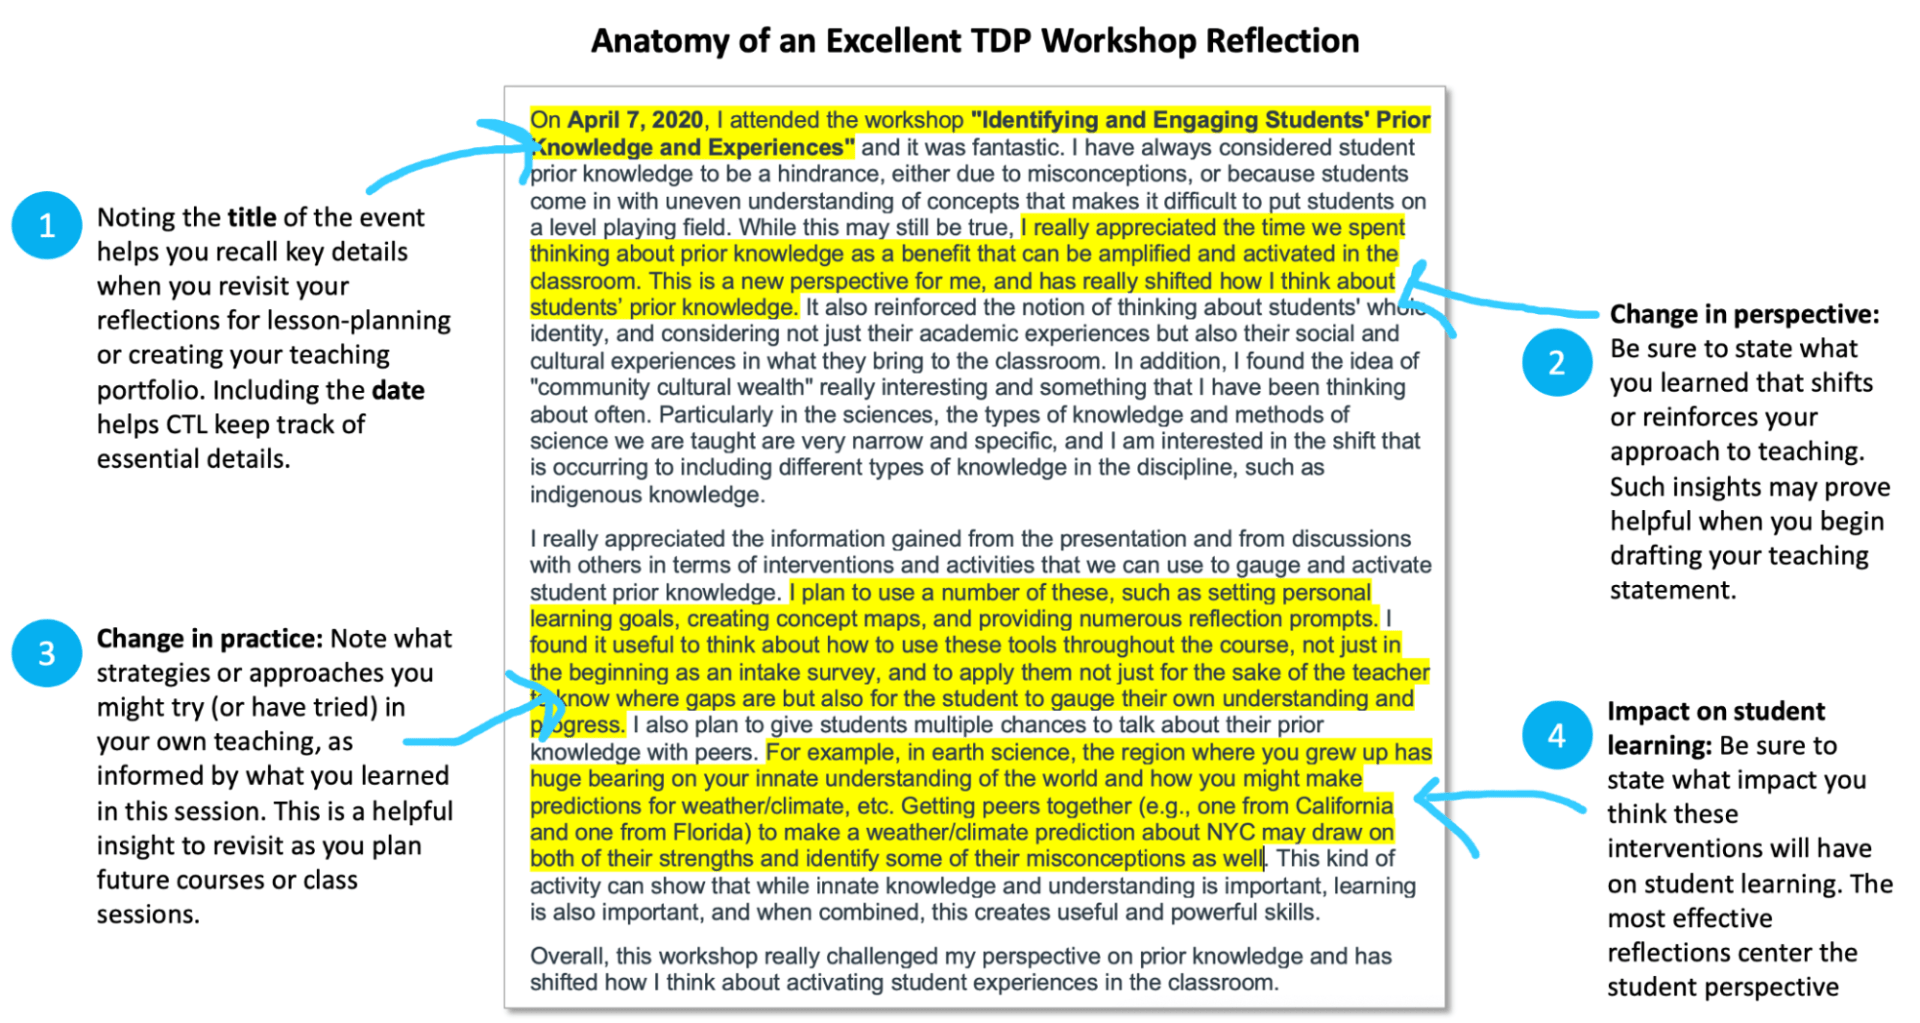 Sample TDP reflection with annotations